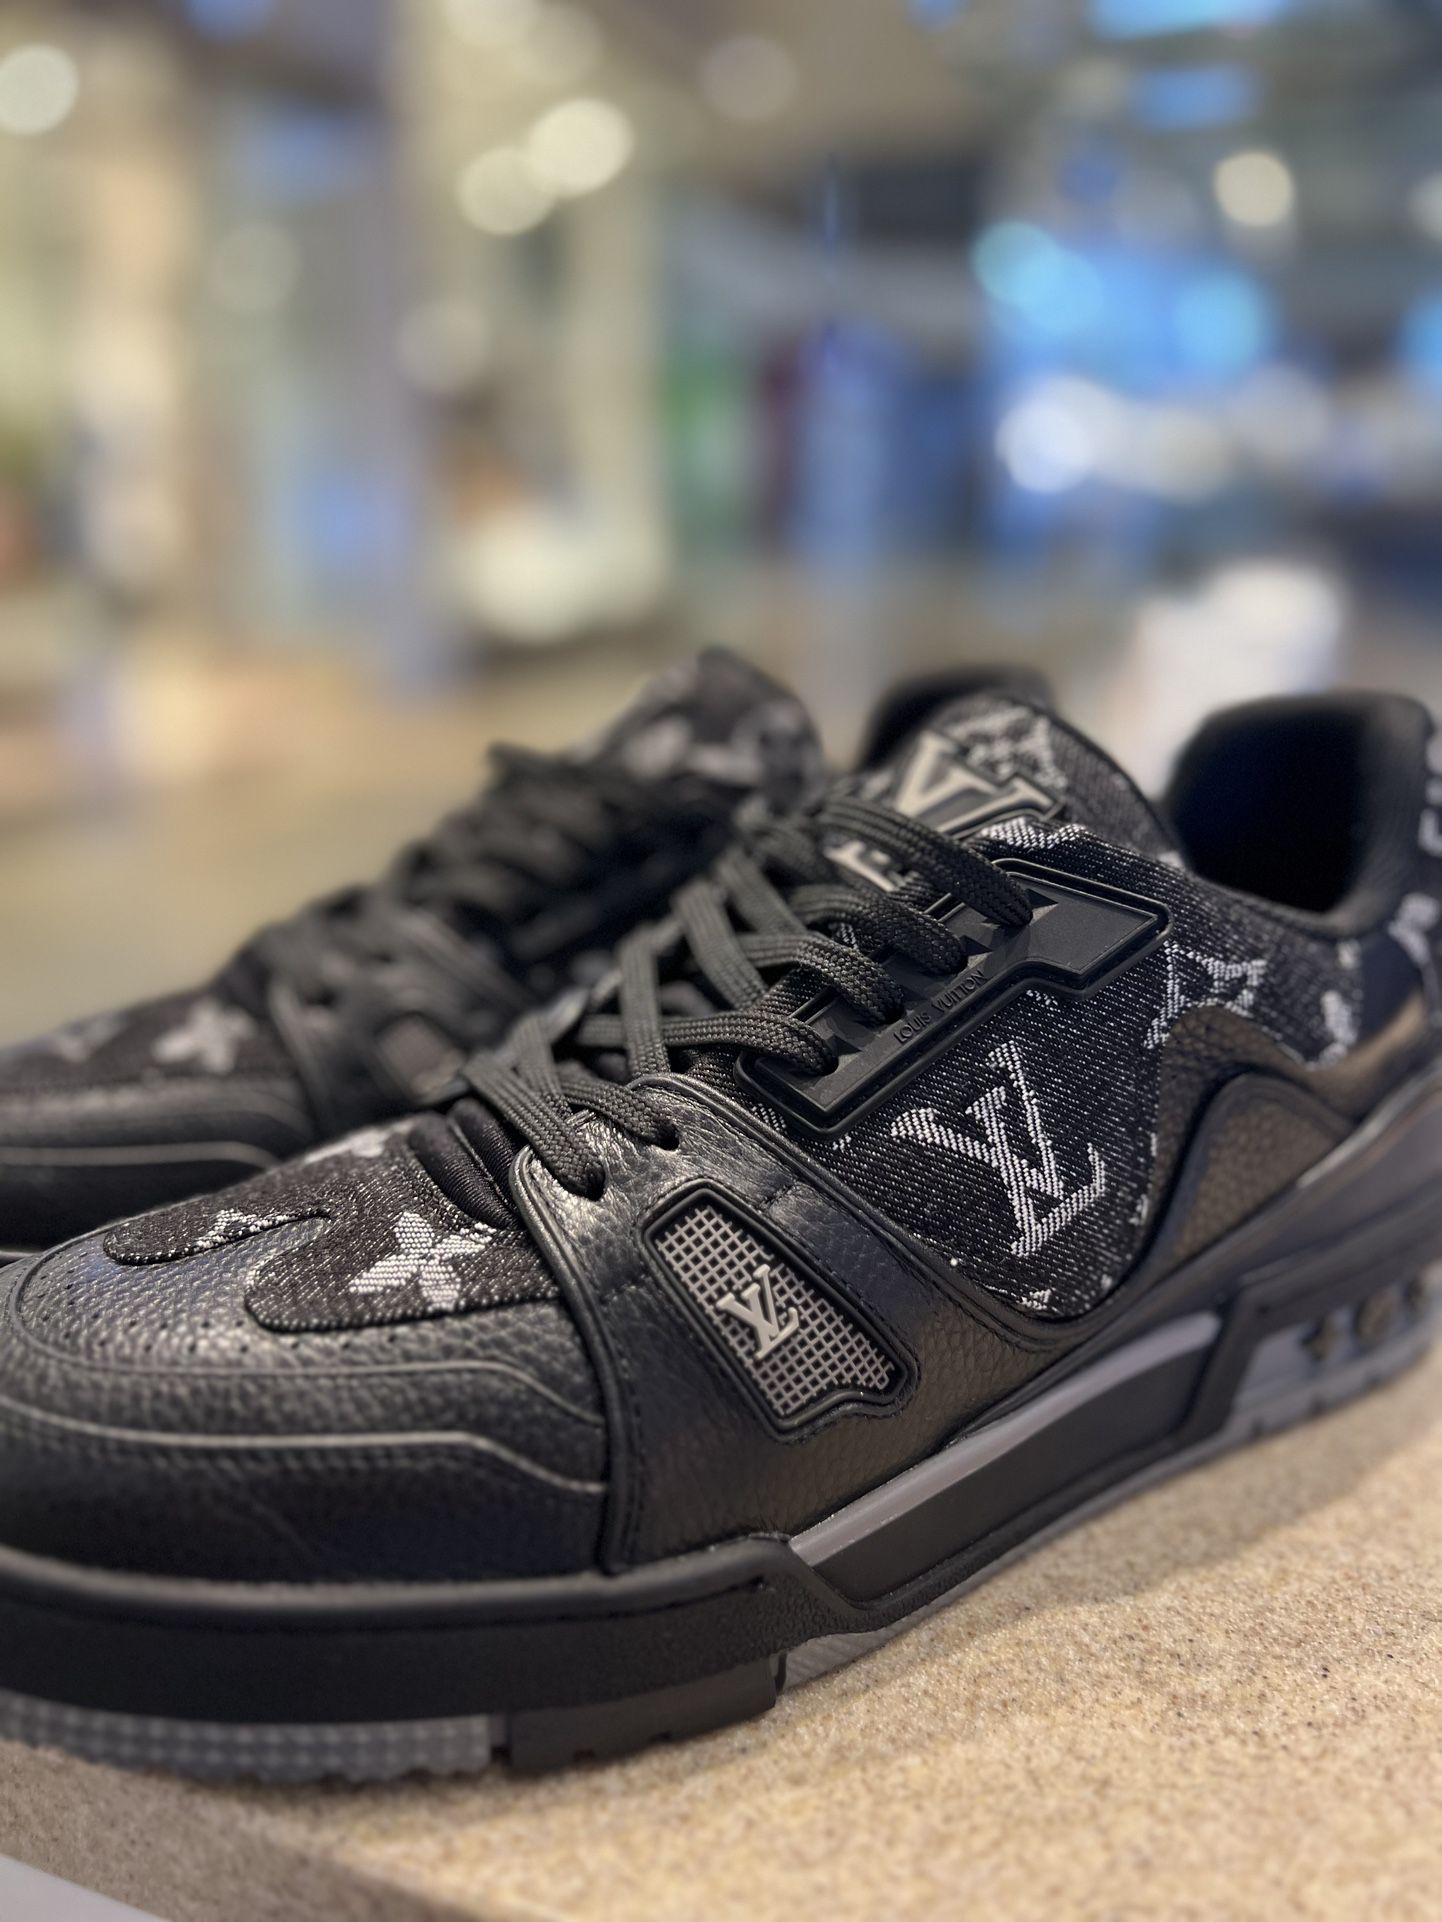 louis-vuitton trainer sneakers size 9